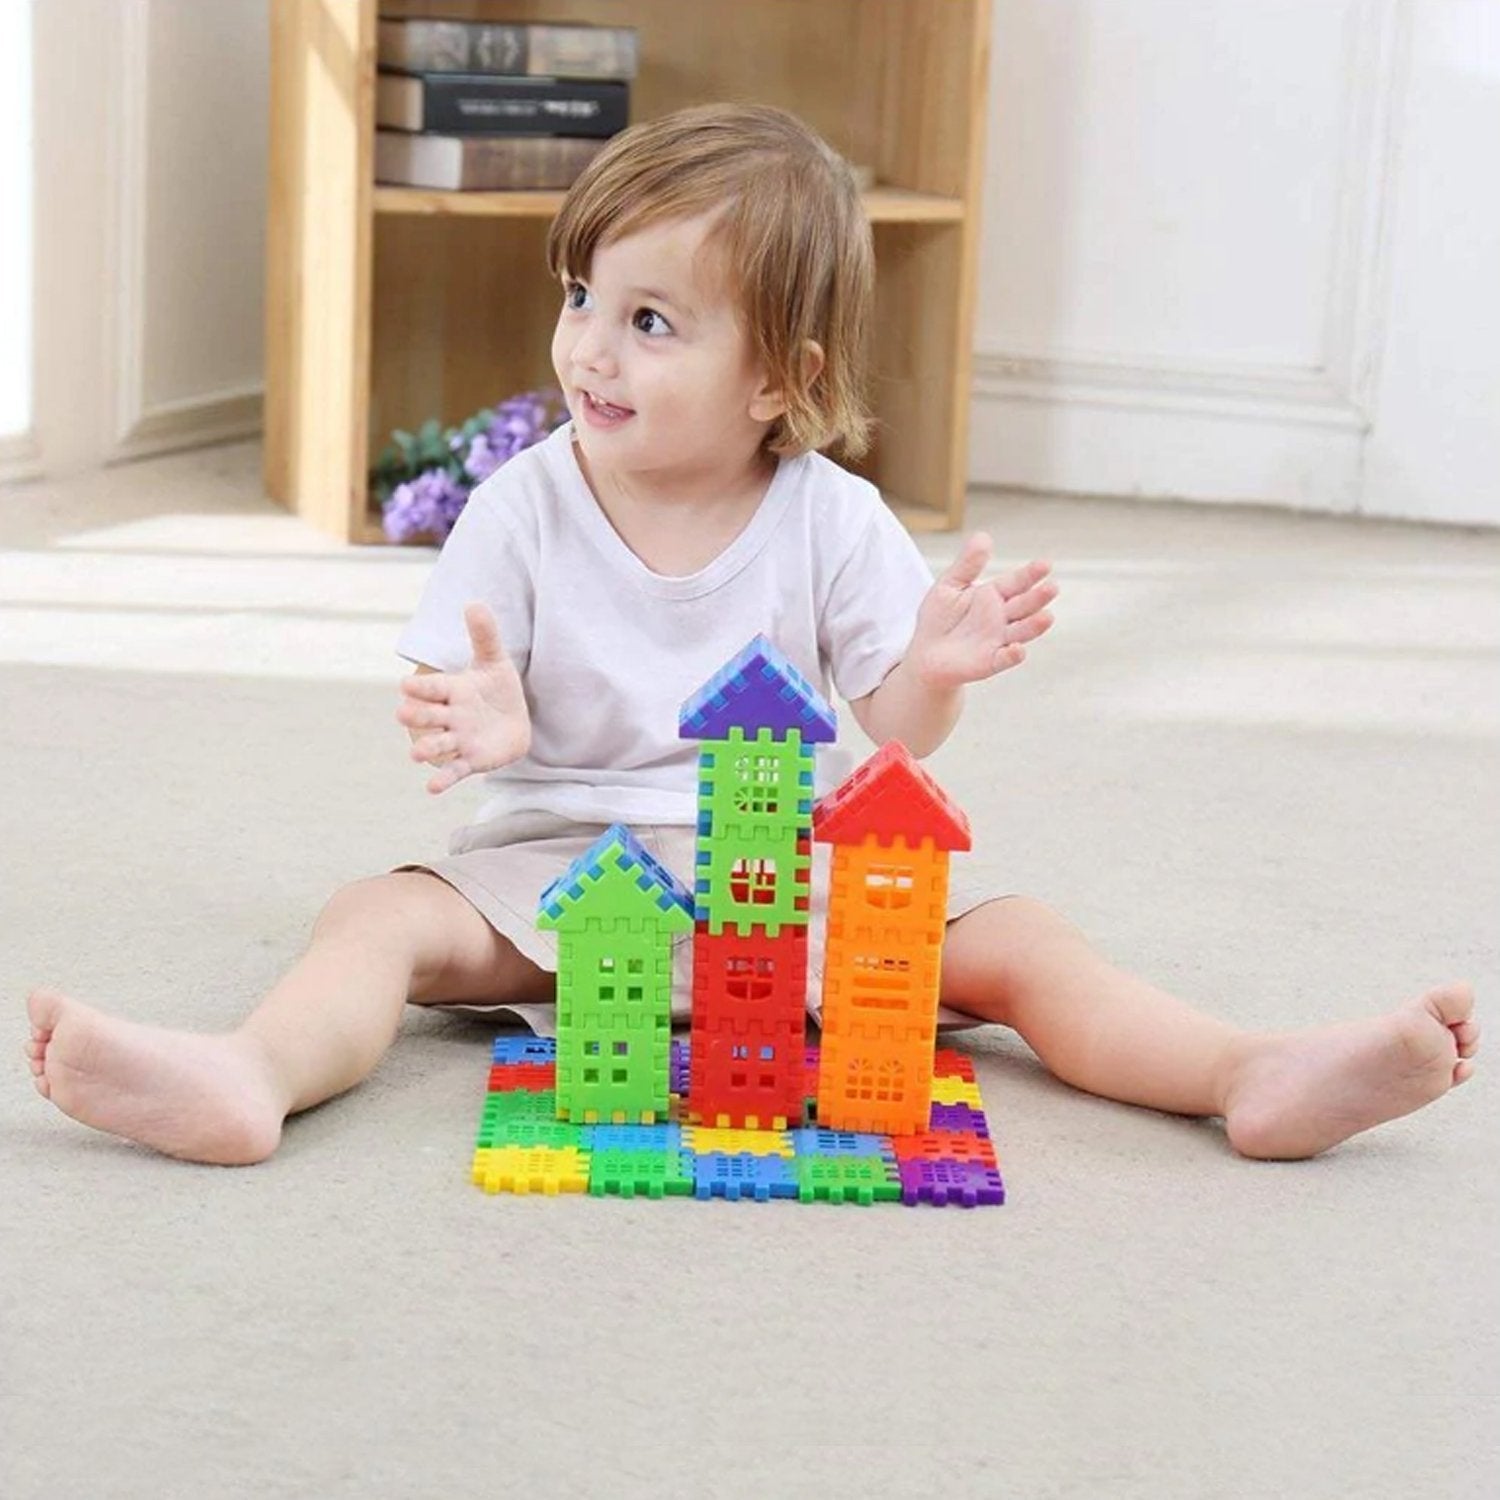 3910 72 Pc House Blocks Toy used in all kinds of household and official places specially for kids and children for their playing and enjoying purposes. 